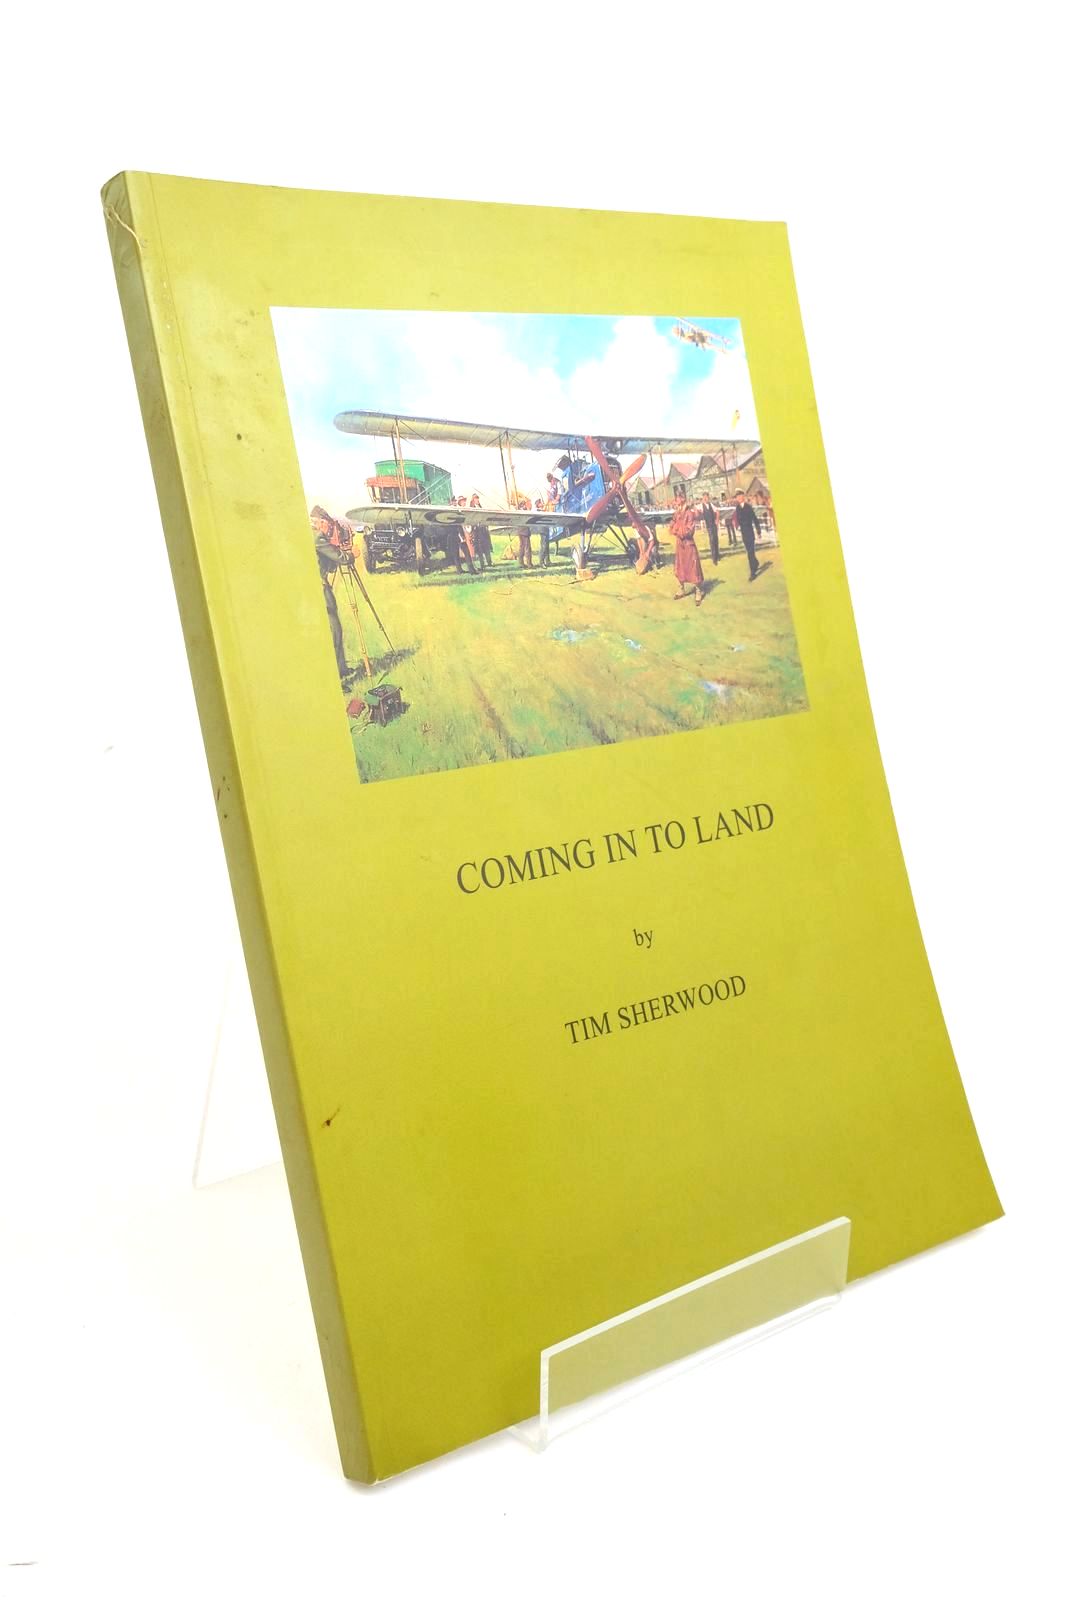 Photo of COMING IN TO LAND written by Sherwood, Tim published by Heritage Publications (STOCK CODE: 1322189)  for sale by Stella & Rose's Books